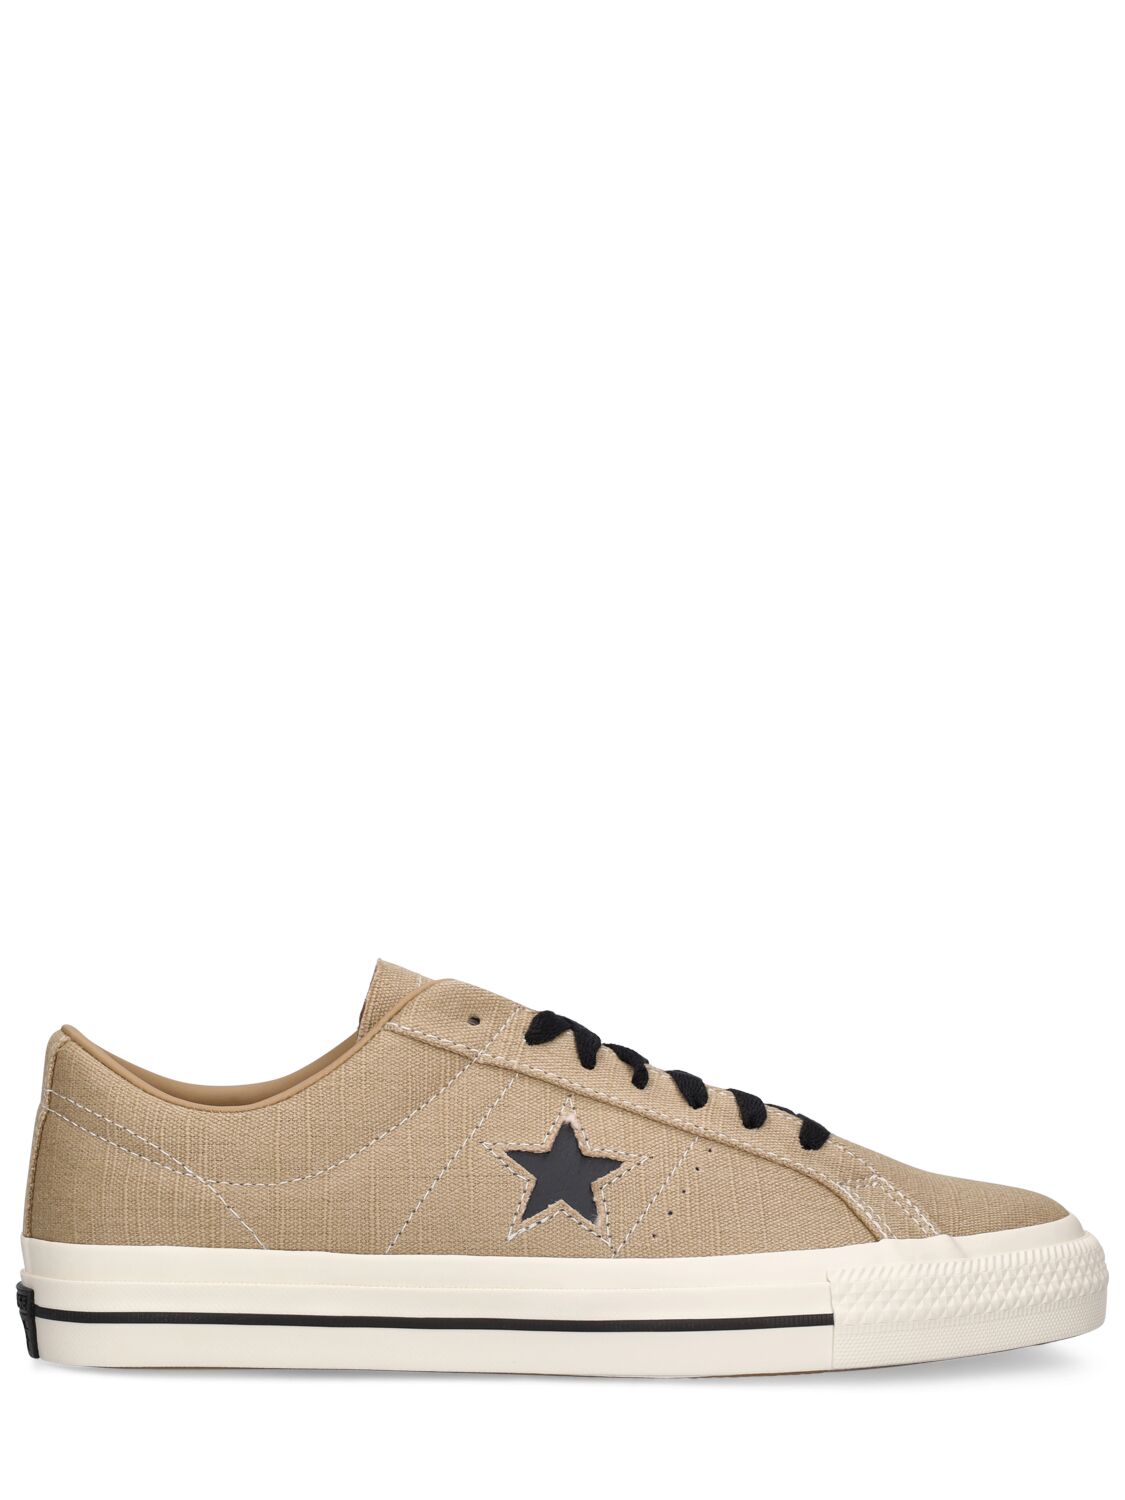 Image of Cons Vulc Pro Sneakers